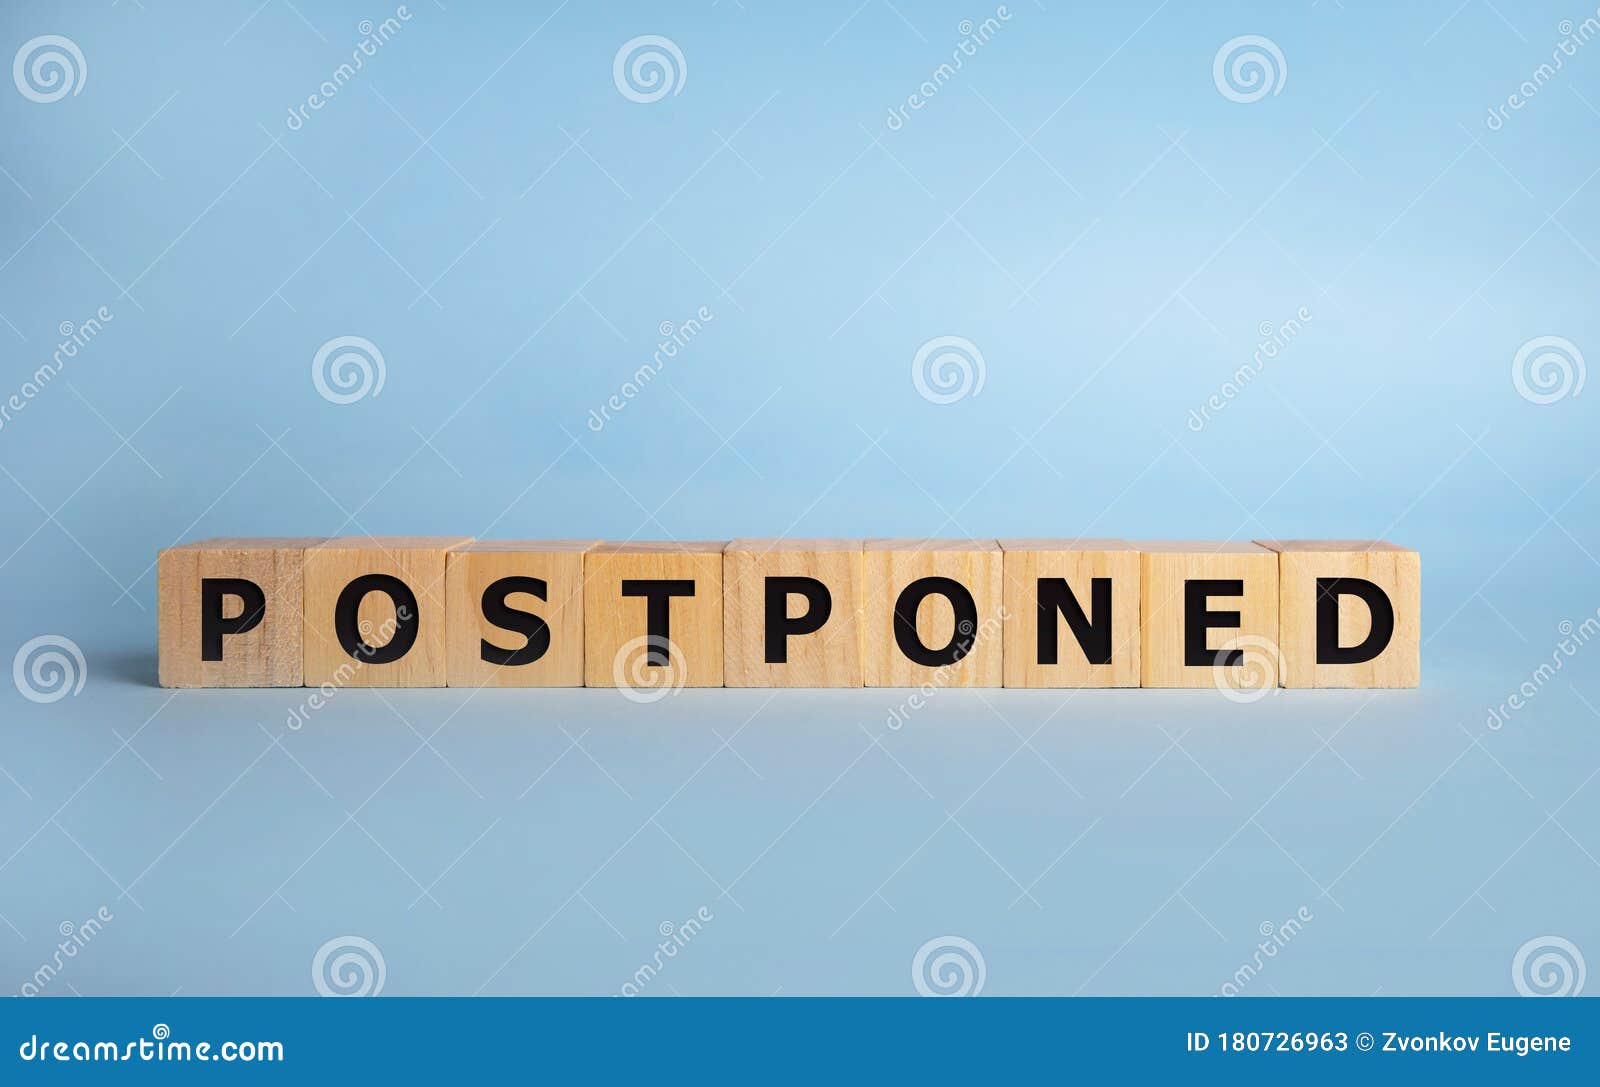 postponed - words from wooden blocks with letters, postponed concept, top view background